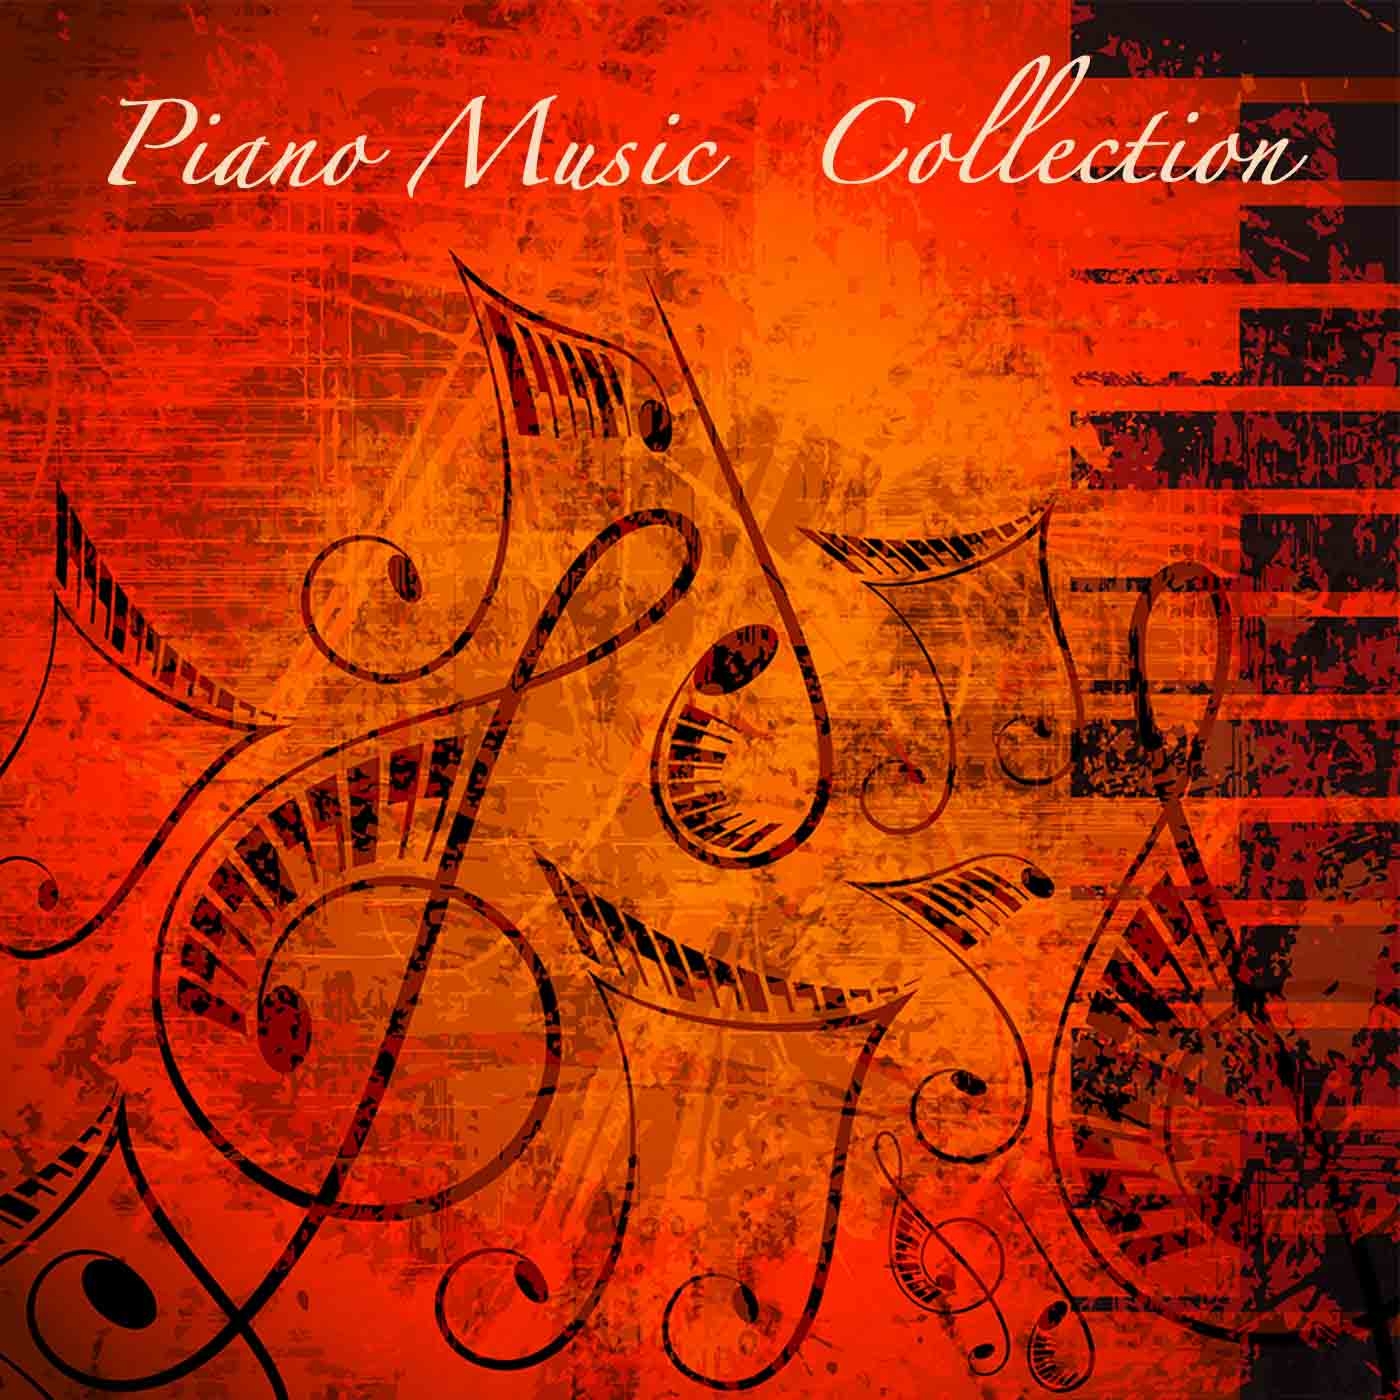 Piano Music Collection: Romantic Piano Music & Classical Piano, Sweet Music for Romantic Moments